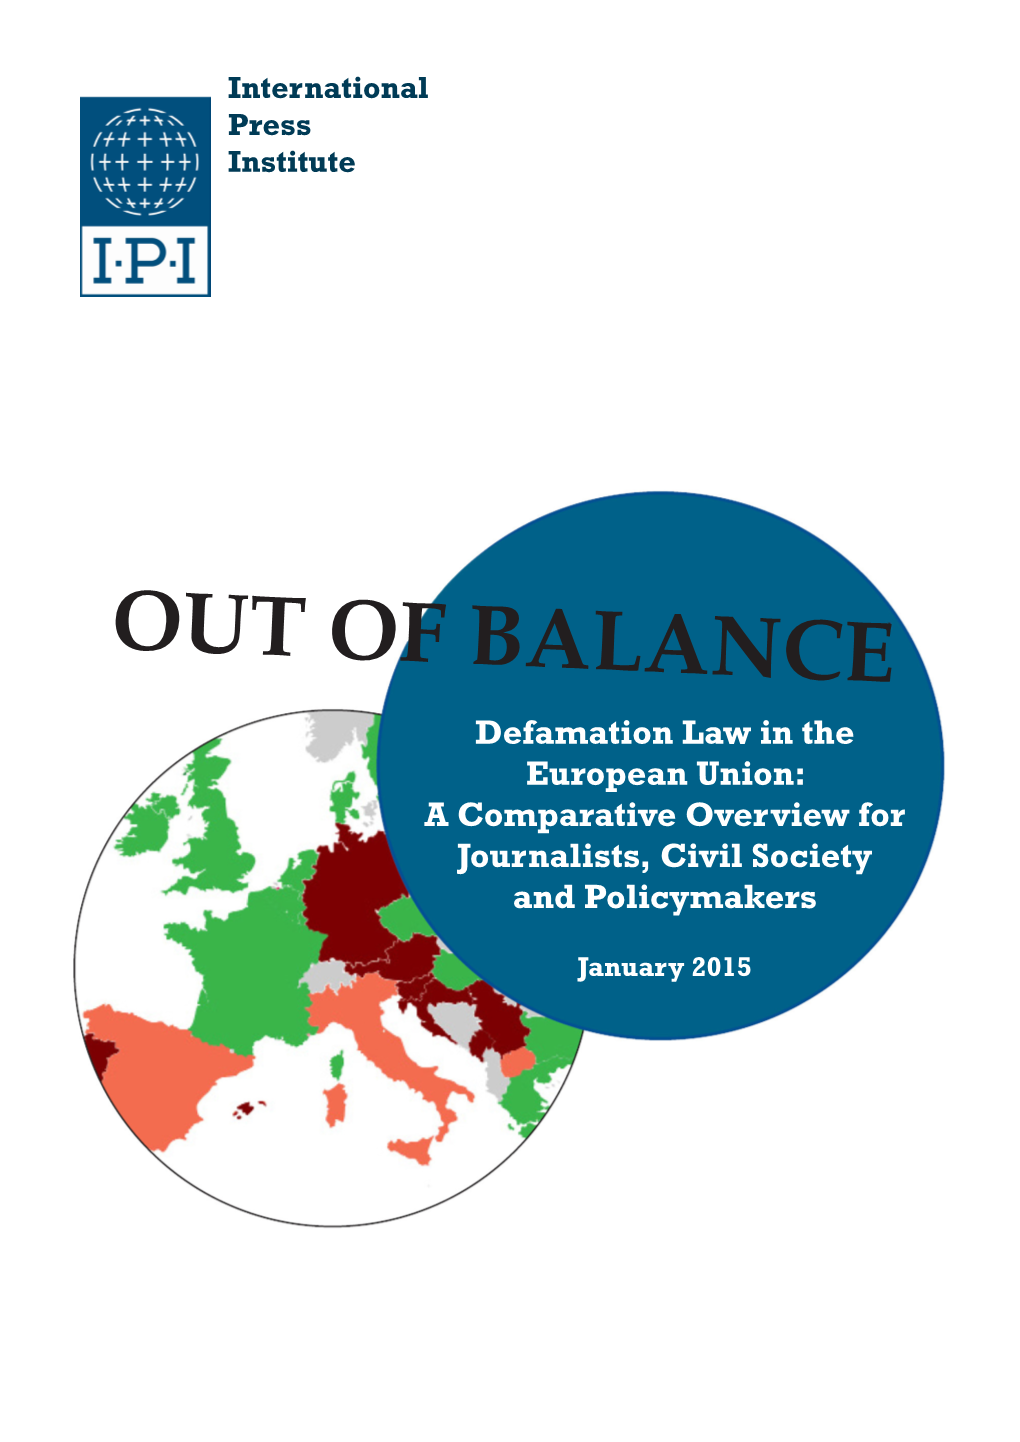 Out of Balance: Defamation Law in the European Union a Comparative Overview for Journalists, Civil Society and Policymakers